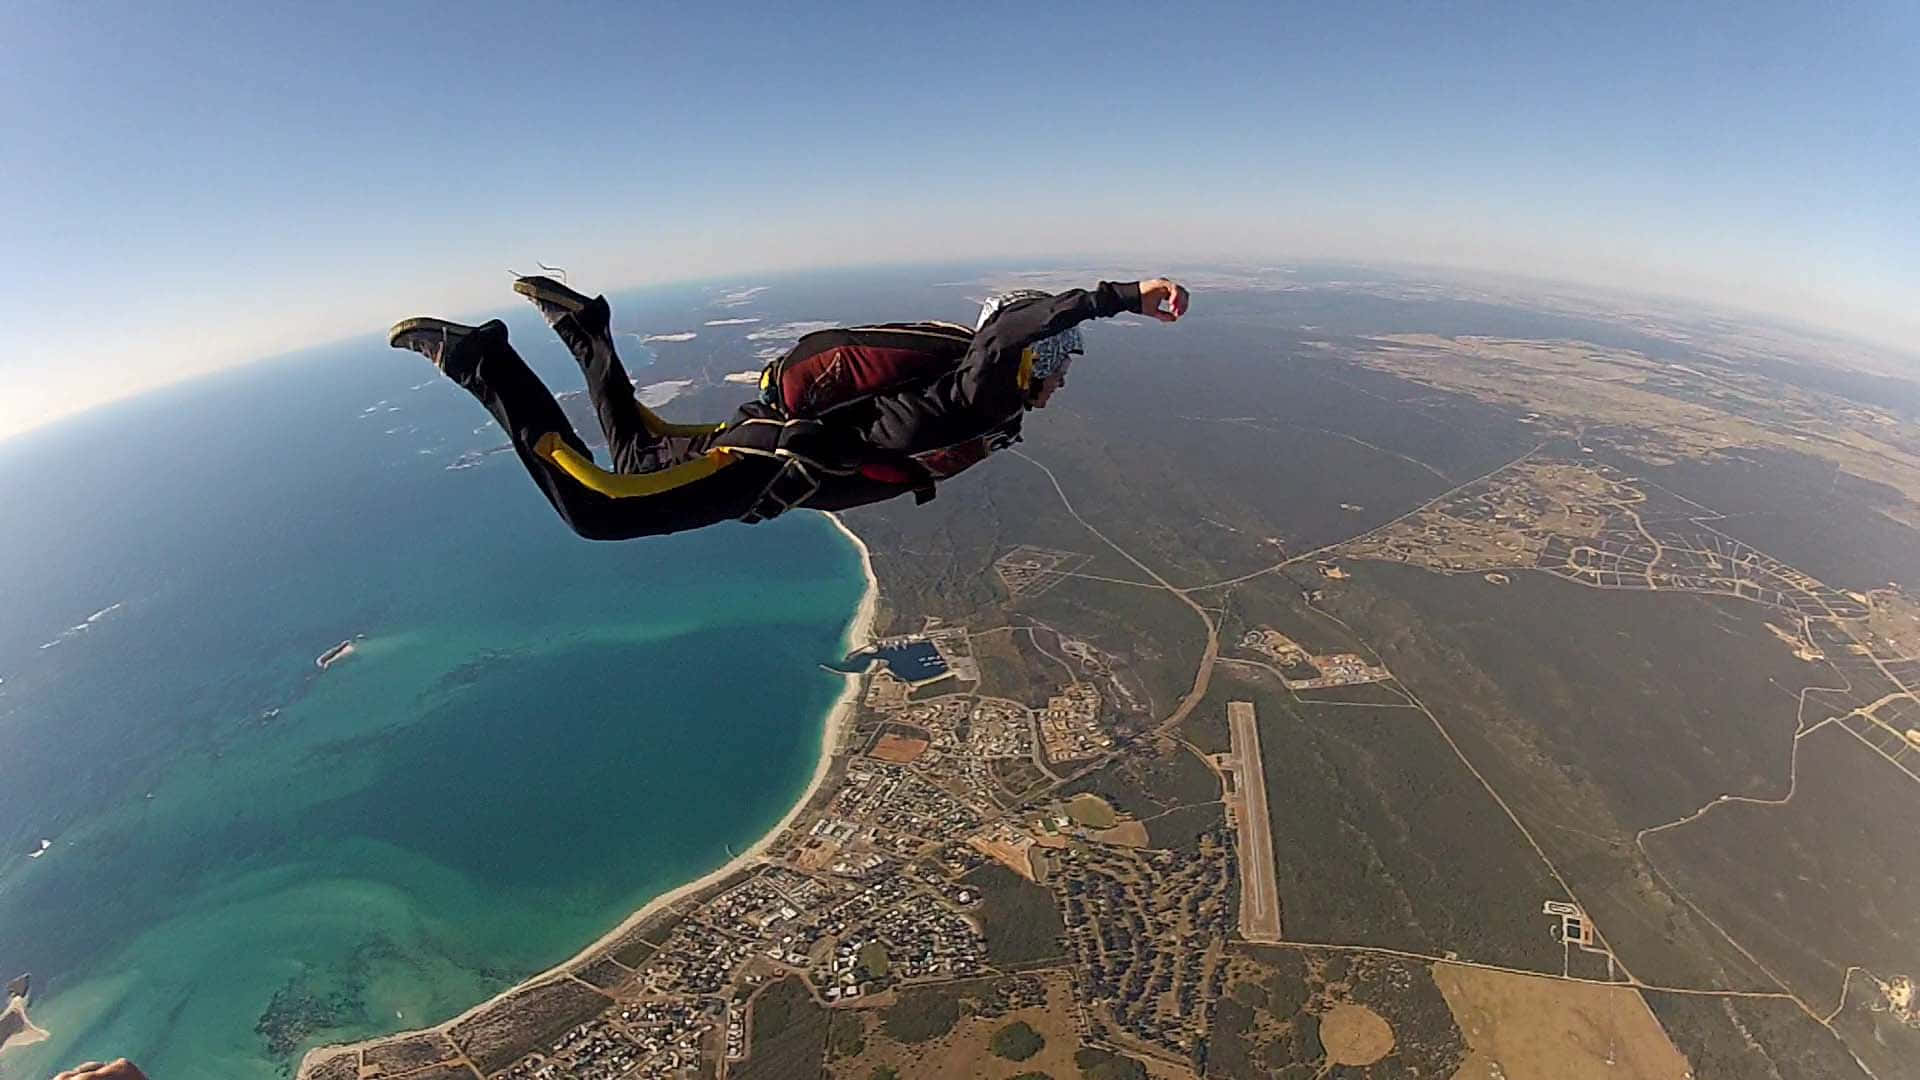 "Experience the thrill of skydiving with the perfect jump!"